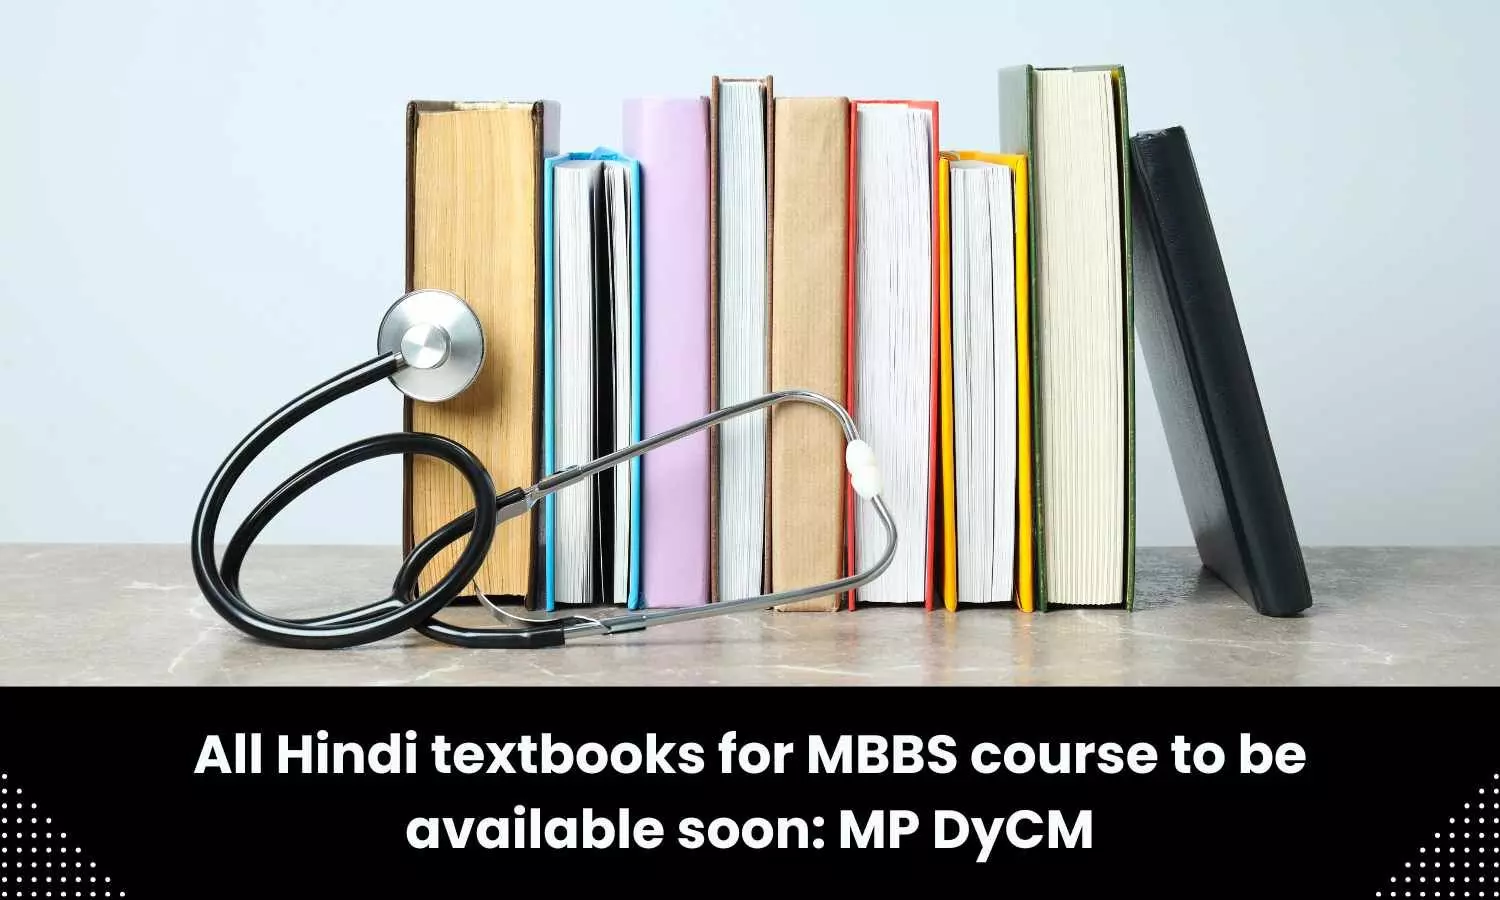 All Hindi textbooks for MBBS course in MP to be available soon: Deputy Chief Minister